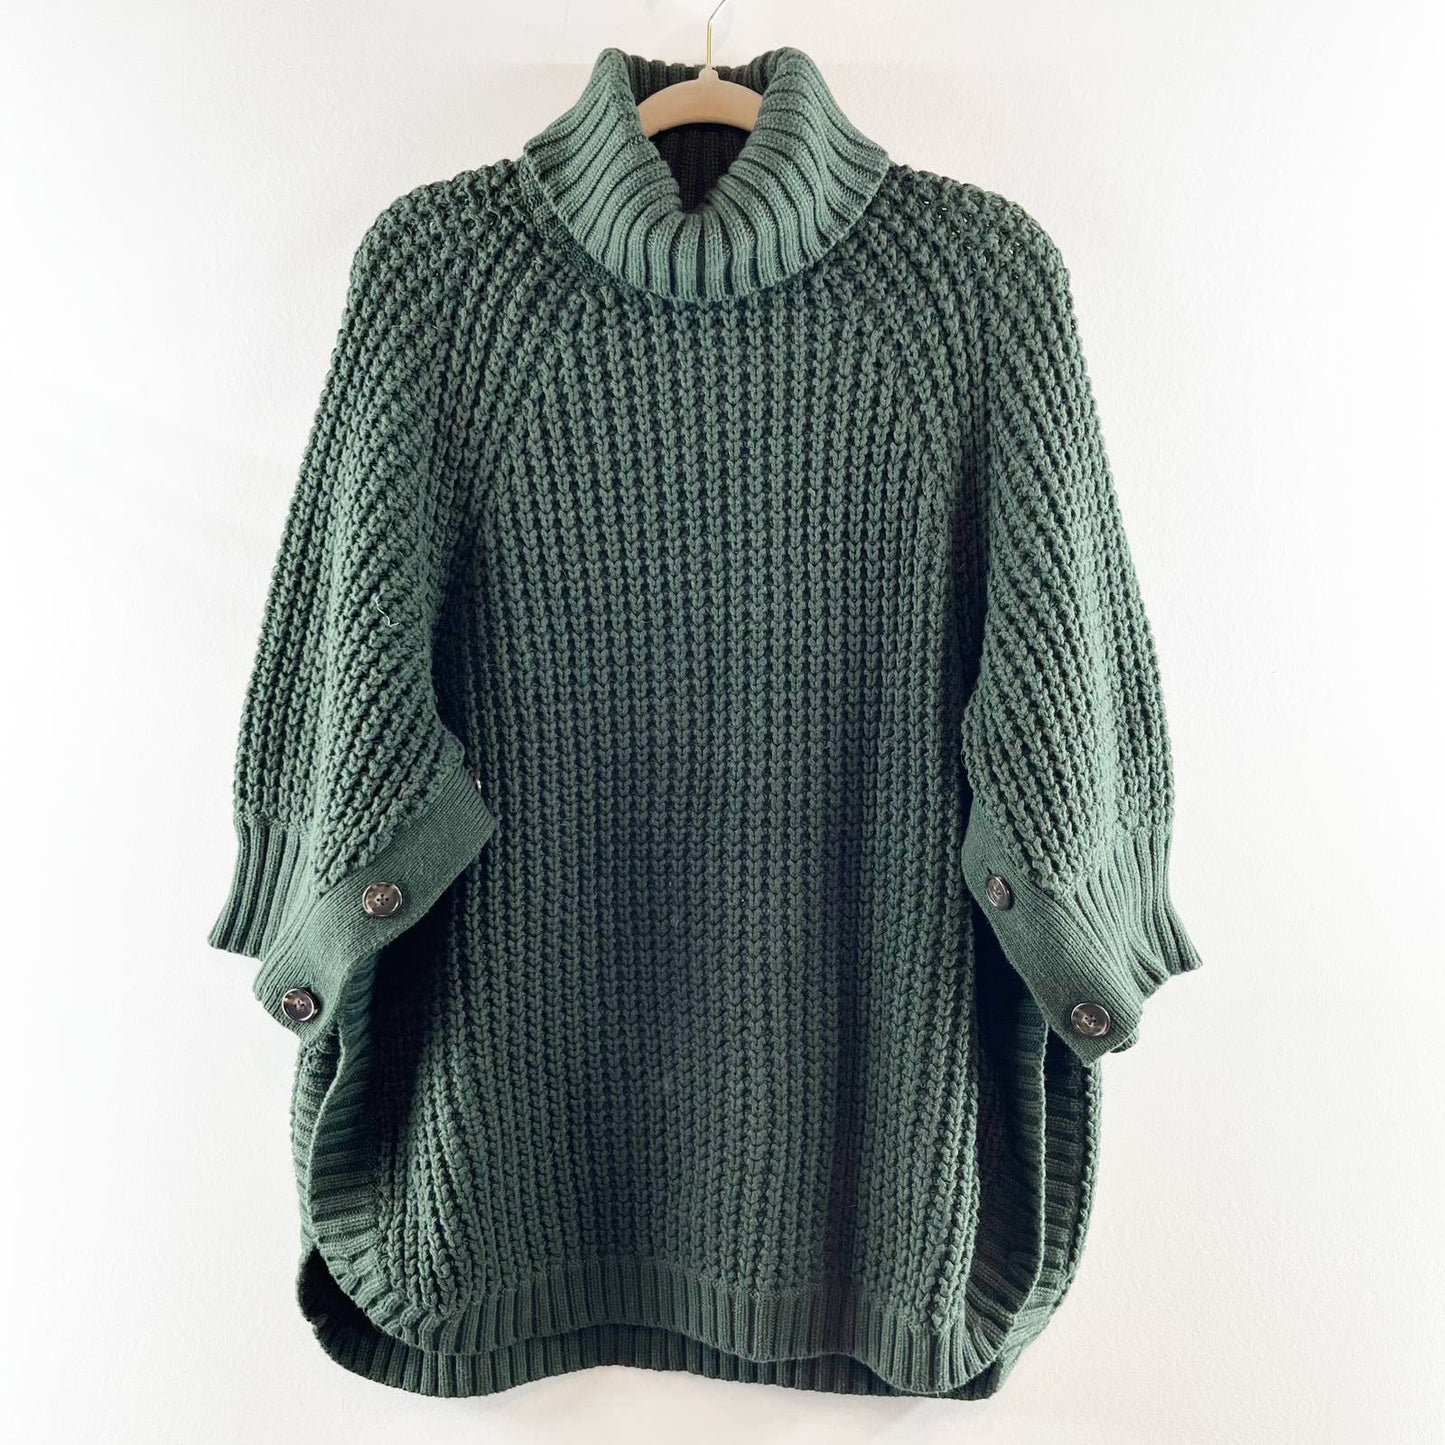 J. Crew Button Sleeve Turtleneck Poncho Sweater in Heather Forest Green Large